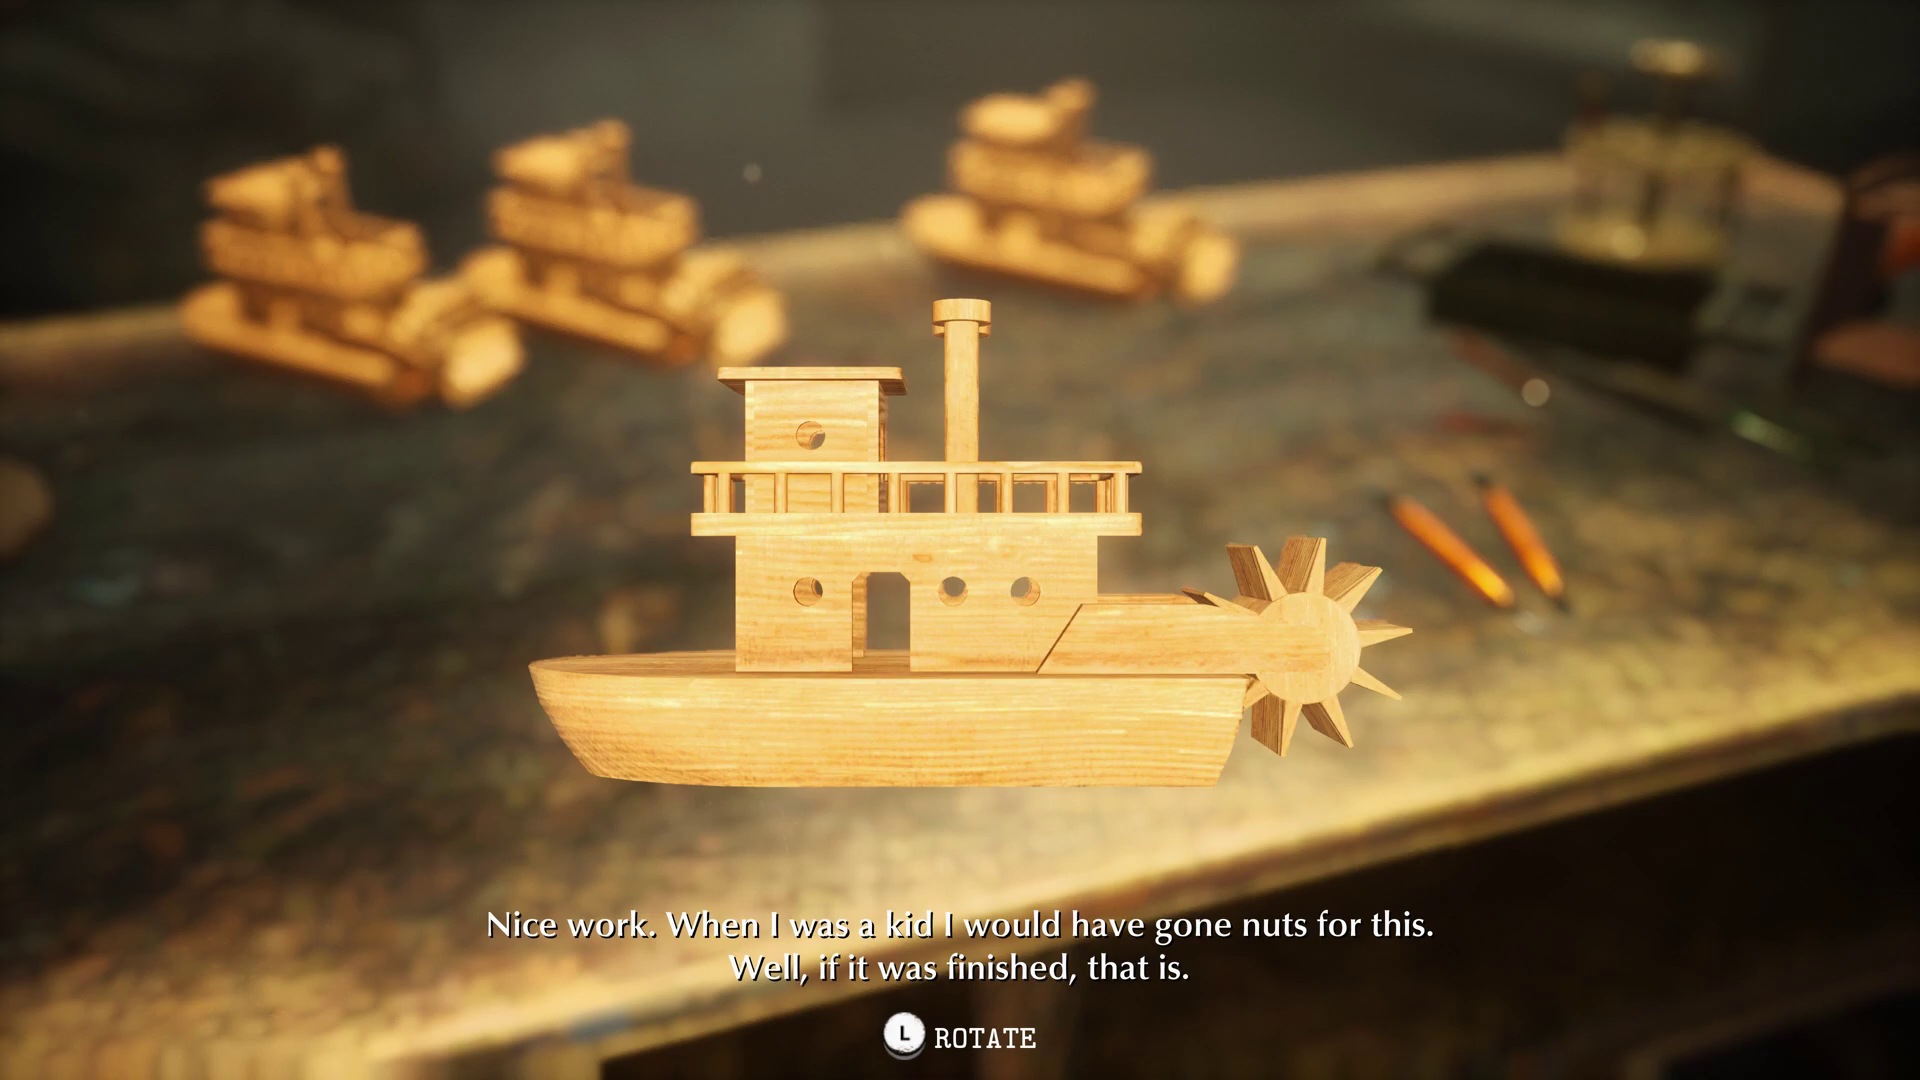 A wooden boat toy with the text Nice work. When I was a kid I would have gone nuts for this. Well, if it was finished, that is.